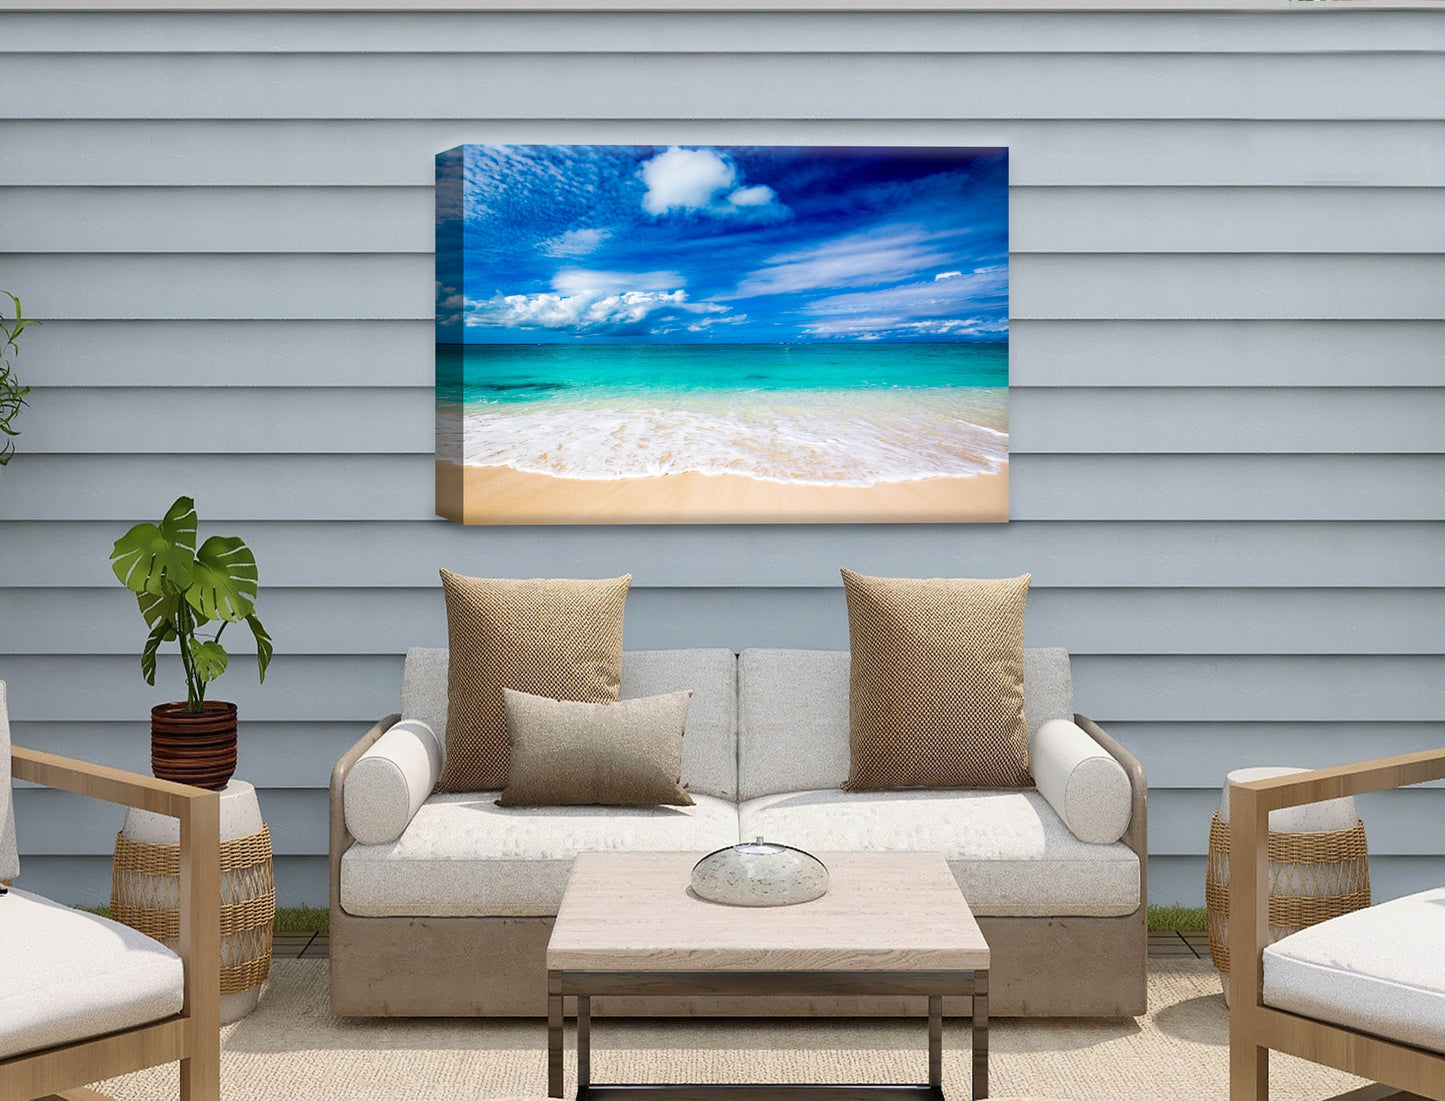 White Sand Beach - Evening on the Pond - Canvas Wrap - Waterproof on Patio 1 Wall